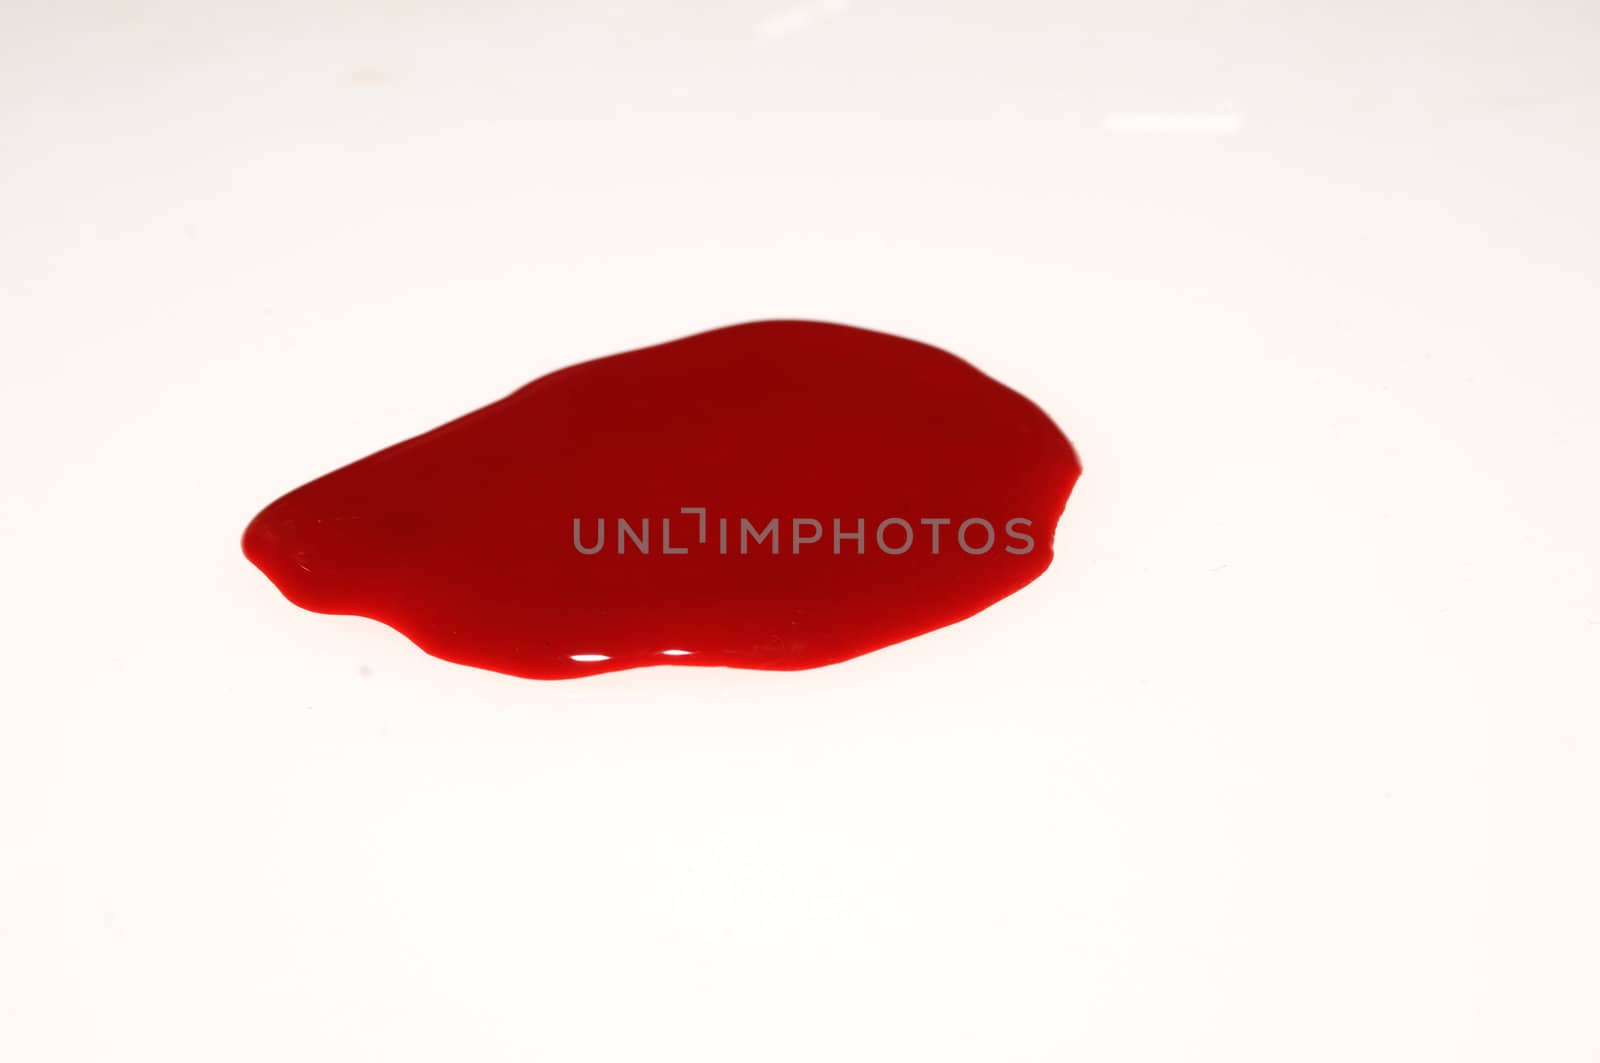 Puddle of red blood on white
